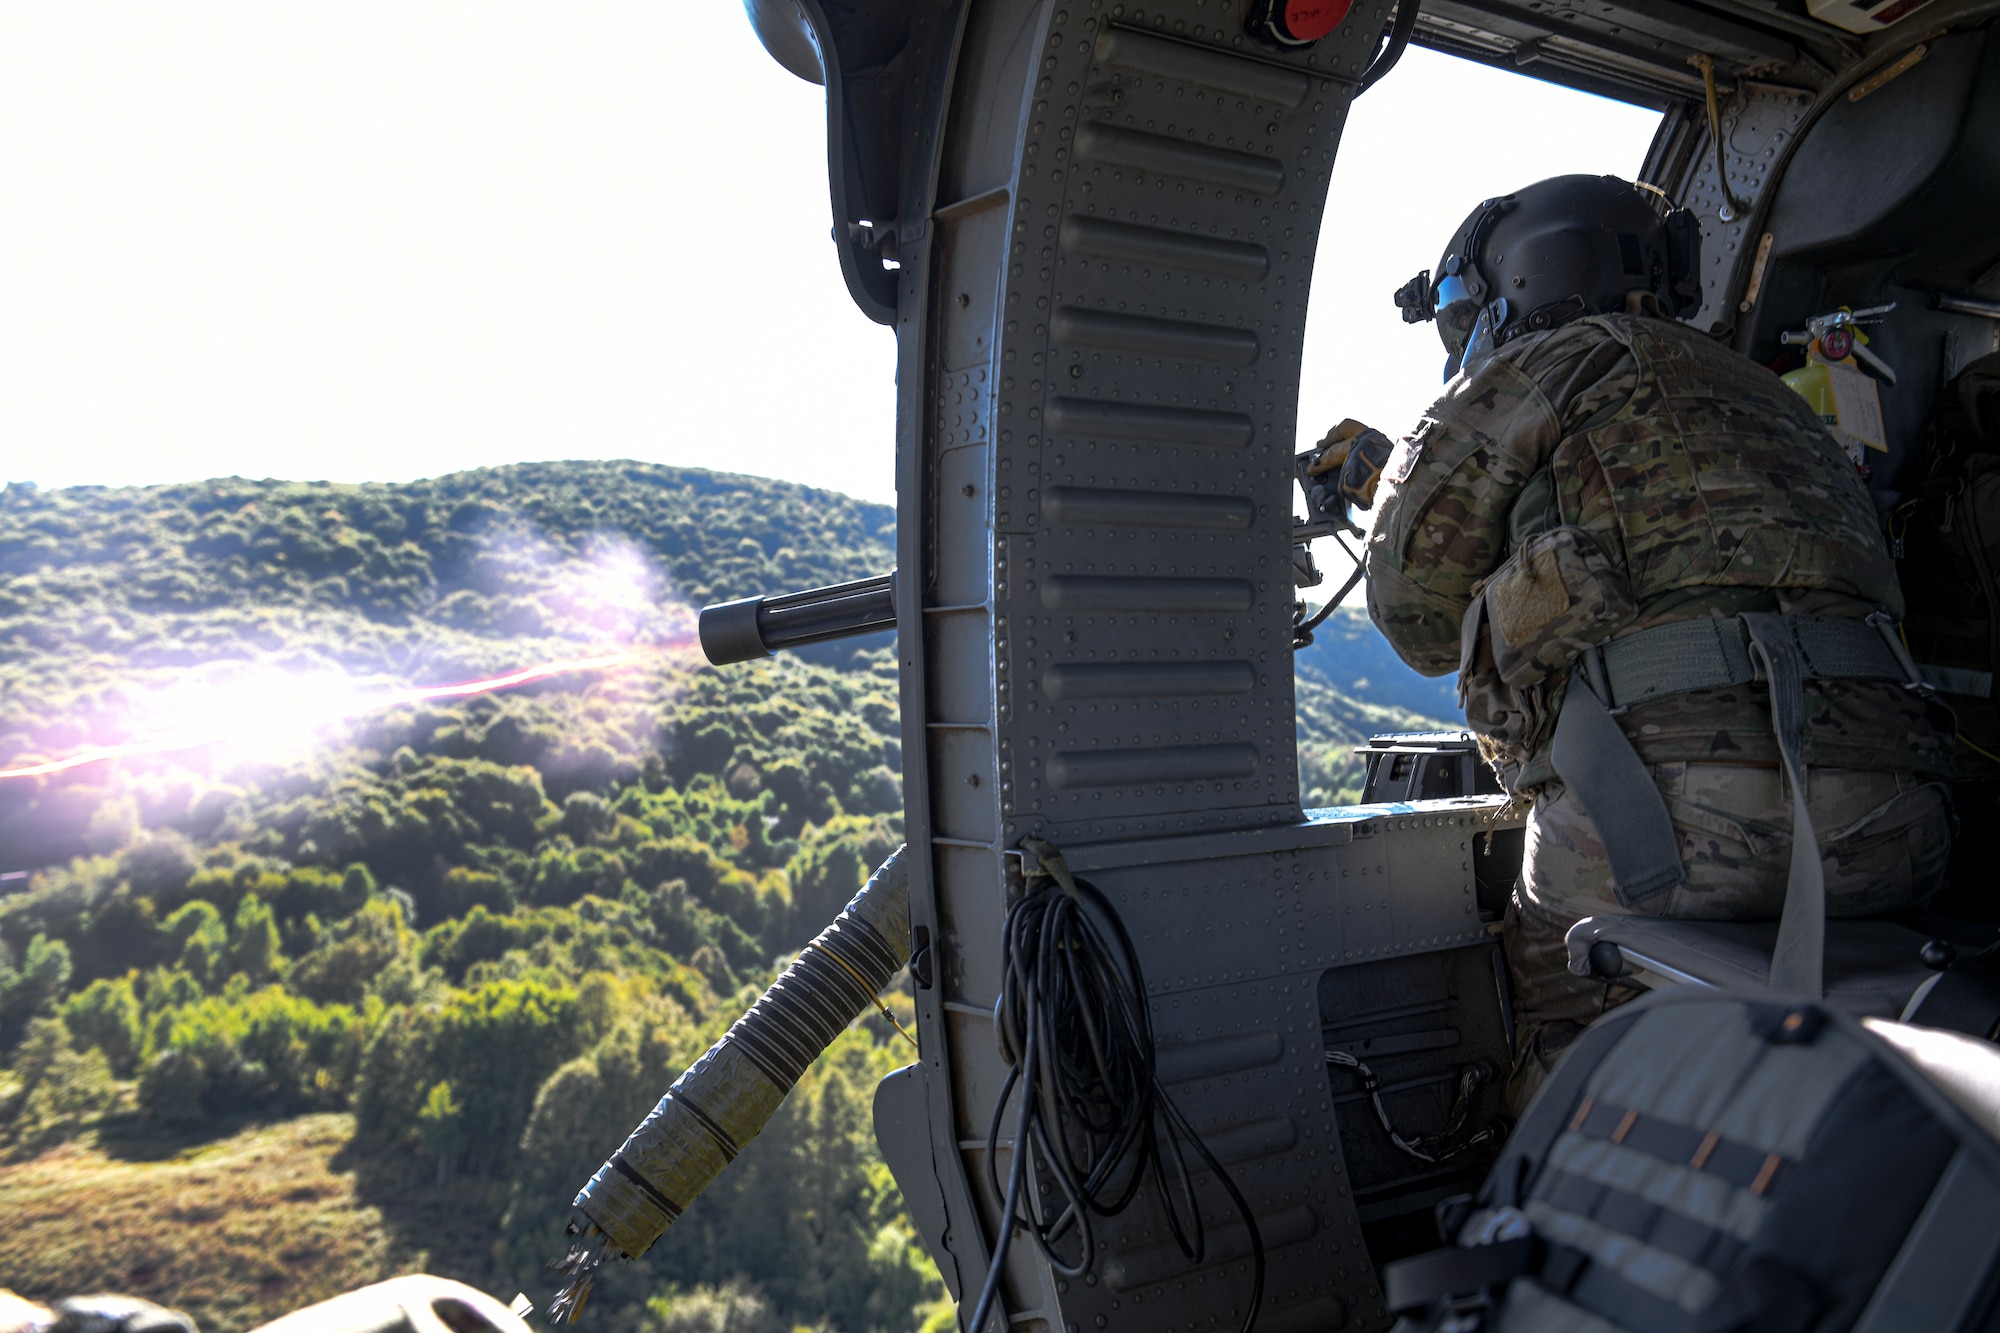 Tech. Sgt. William Mathis, 56th Rescue Squadron special missions aviator evaluator, shoots out of an HH-60G Pave Hawk during a final sortie in Croatia, Sept. 23, 2021. The 56th RQS integrated with the 173rd Army unit from Vicenza and provided top cover during a live-fire exercise. (U.S. Air Force photo by Senior Airman Brooke Moeder)